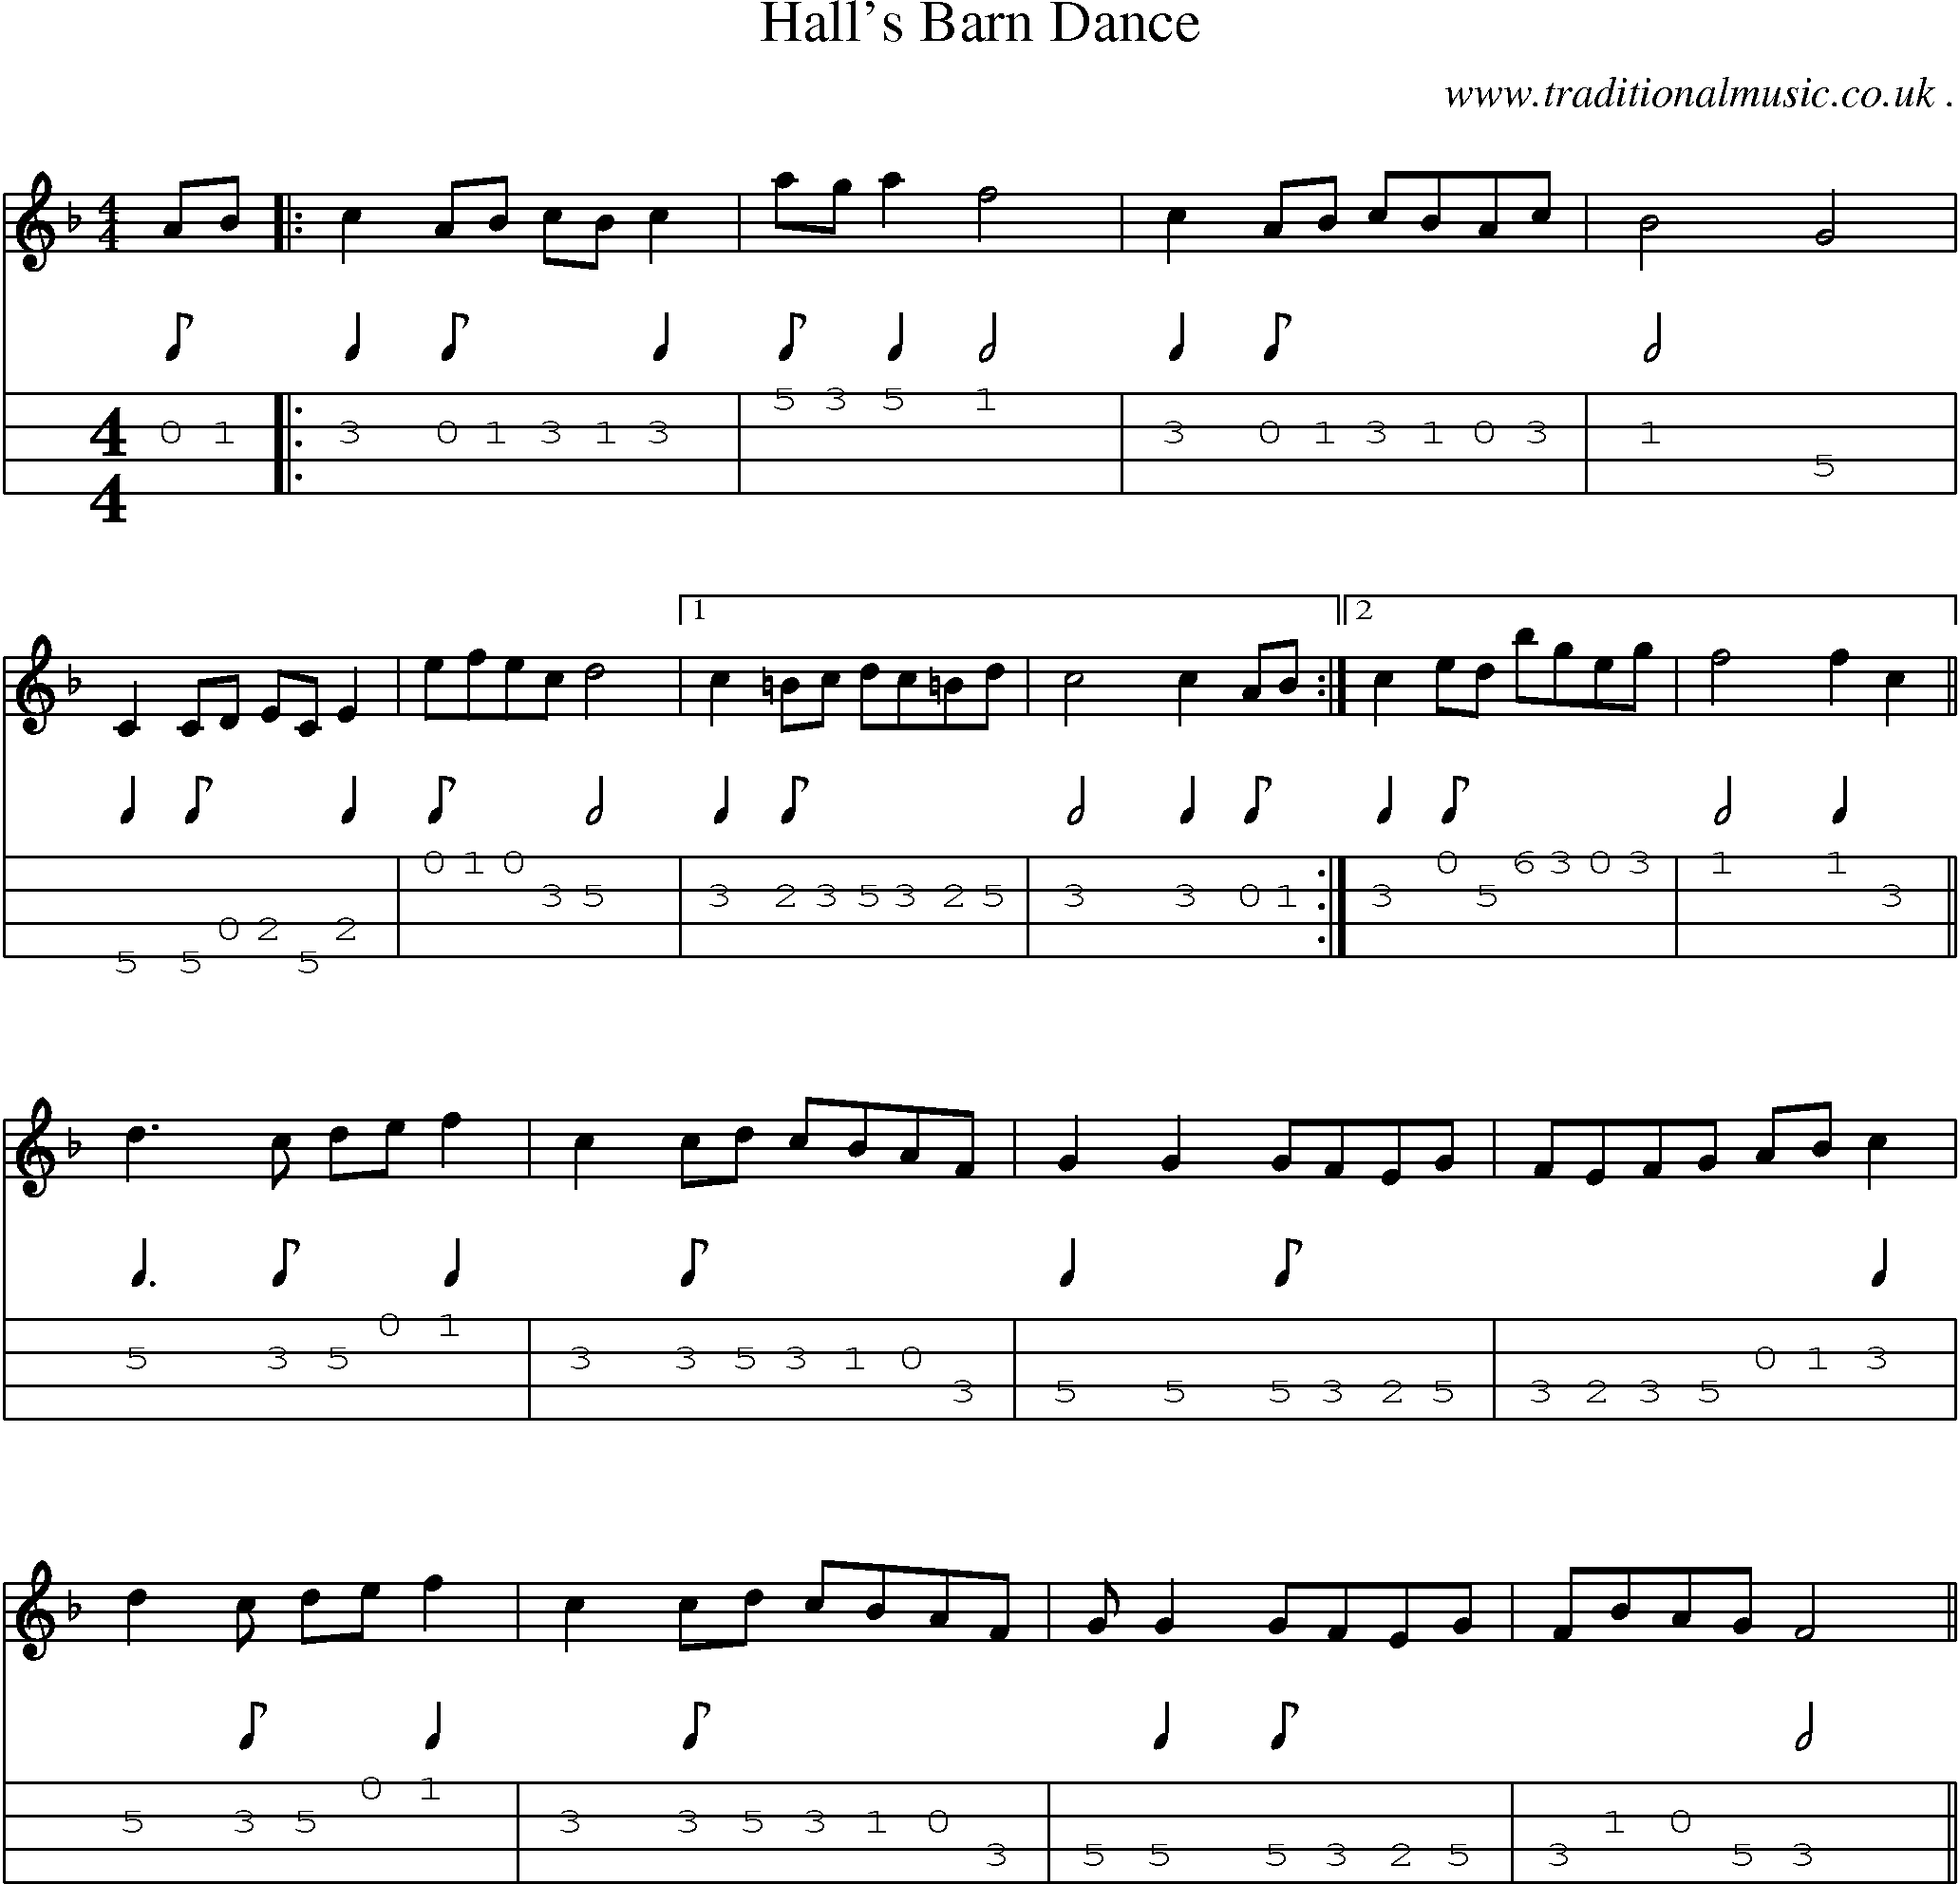 Music Score and Guitar Tabs for Halls Barn Dance